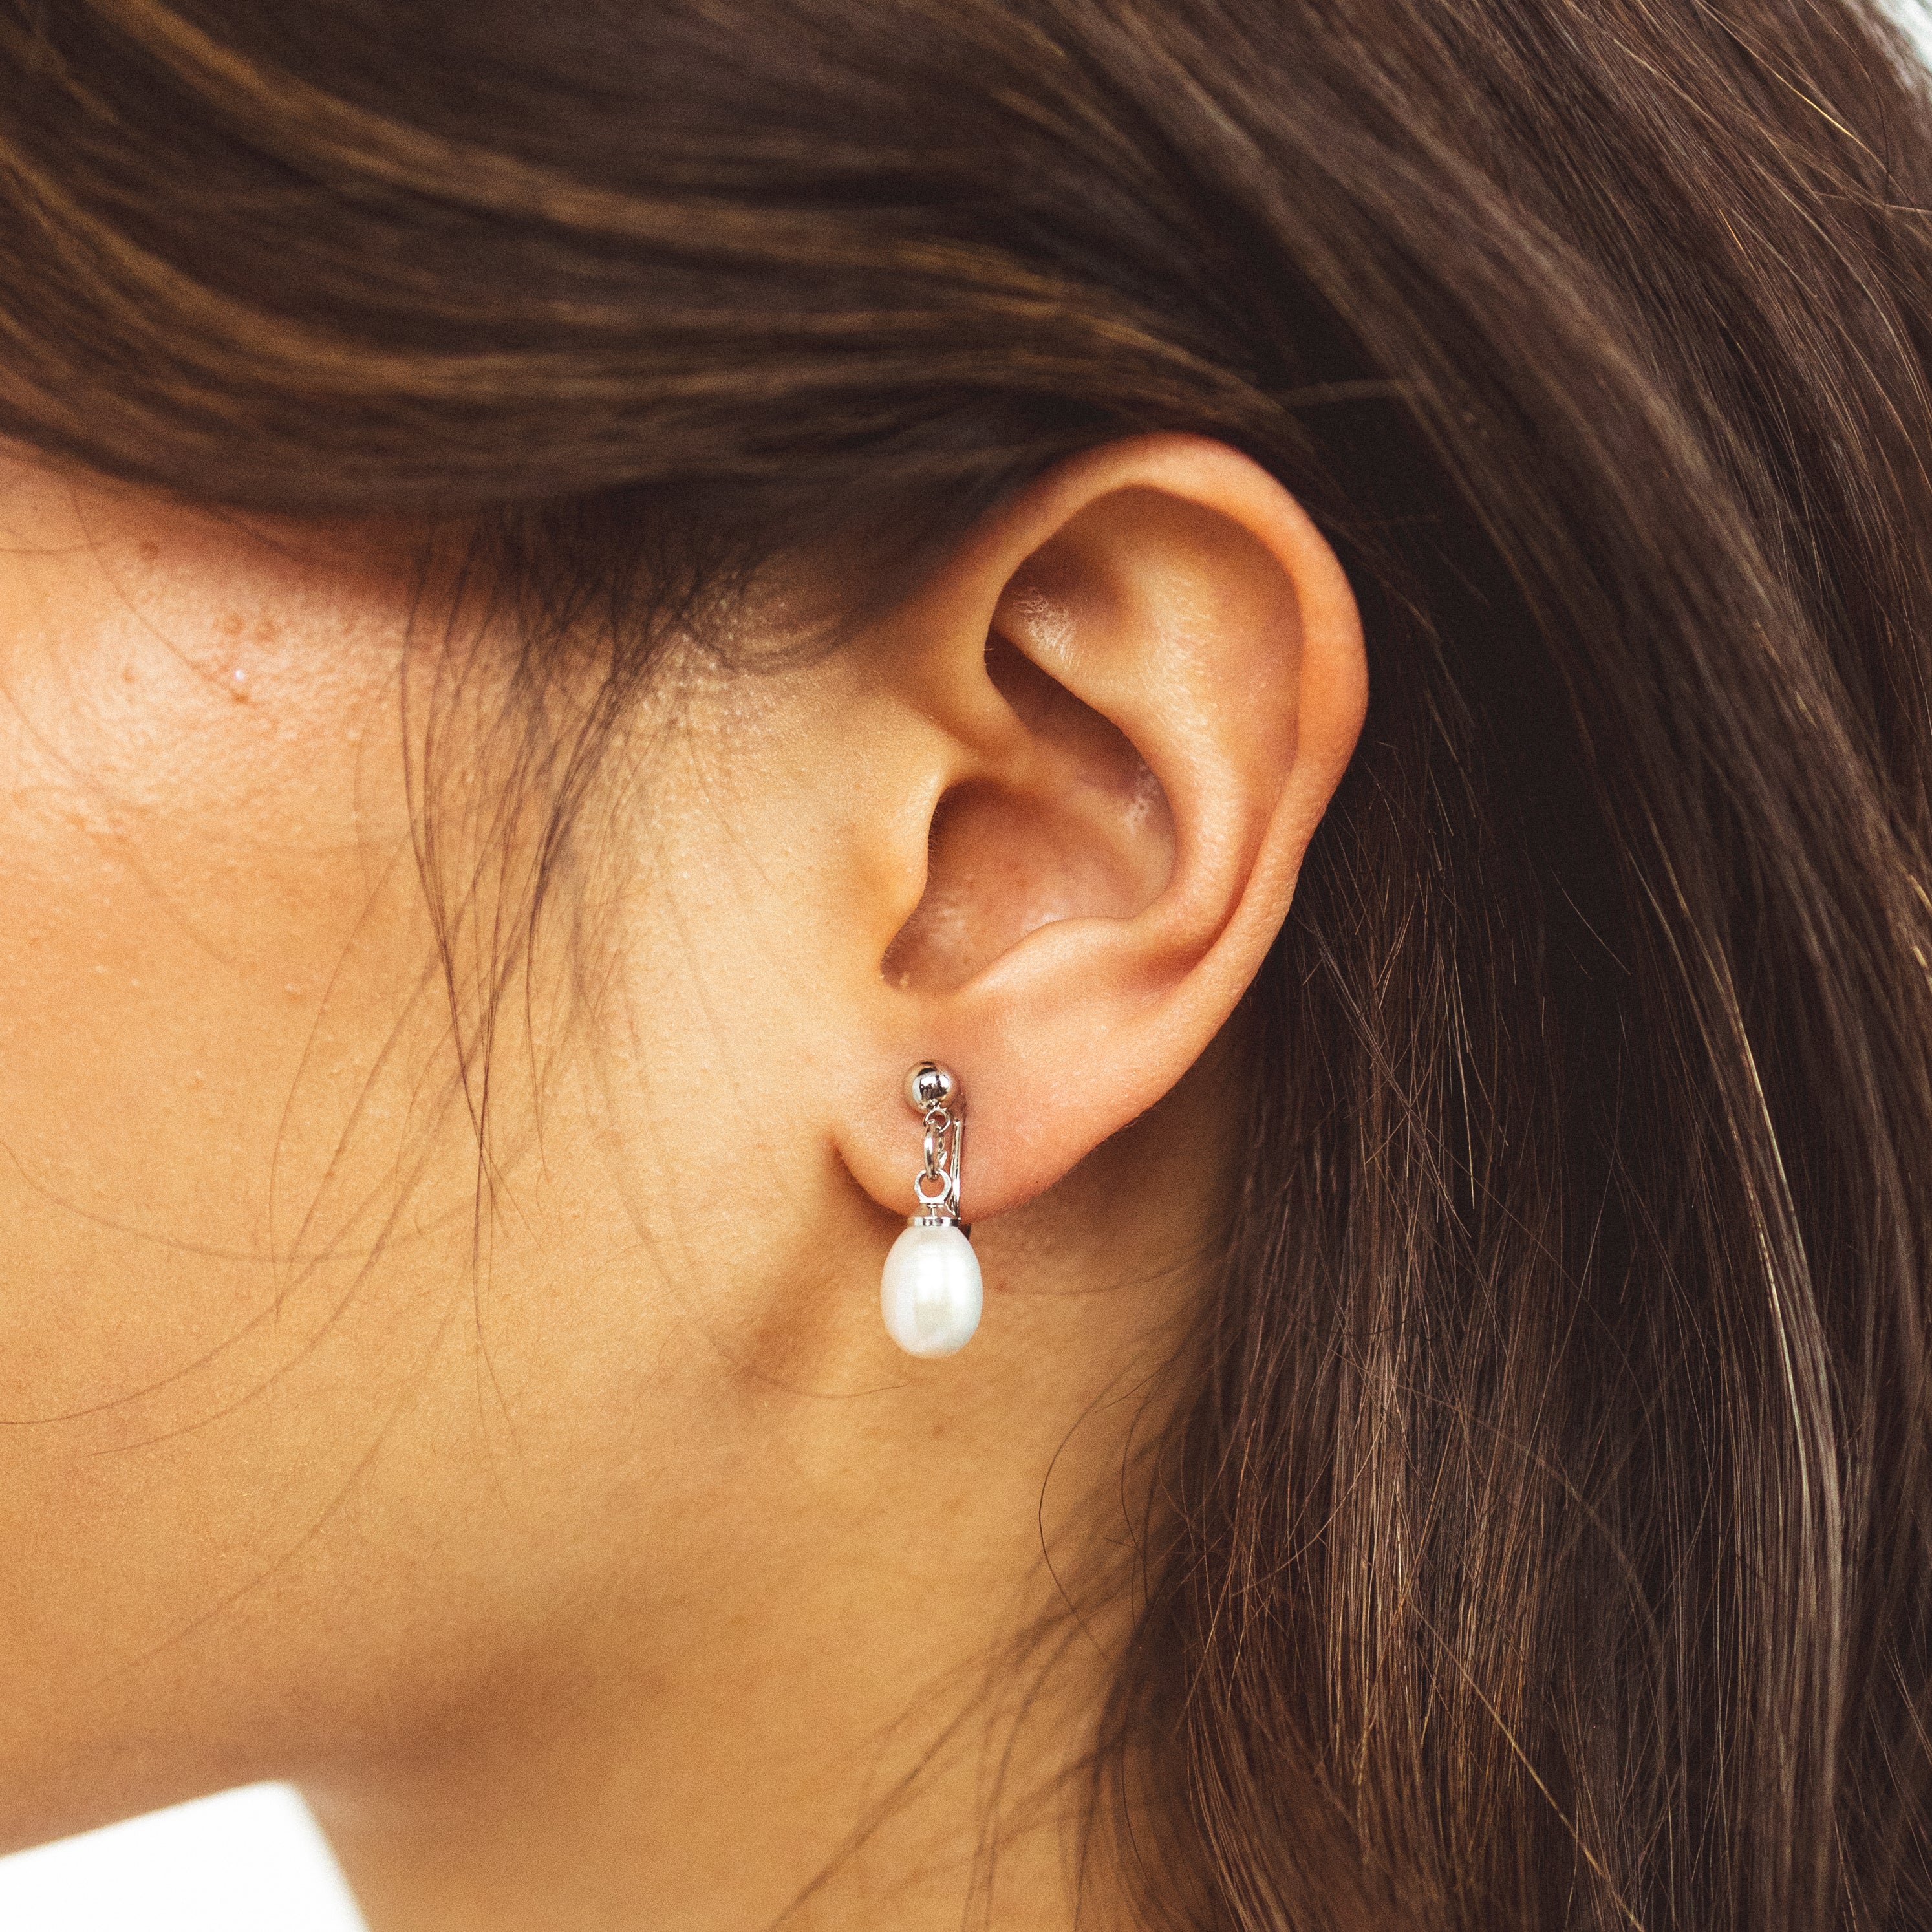 A model wearing the Elio Clip On Earrings. Designed for all ear types, these elegant earrings provide a secure hold for up to 24 hours. Enjoy unparalleled comfort and style, perfect for those with sensitive or stretched ears. Upgrade your style effortlessly with Elio.